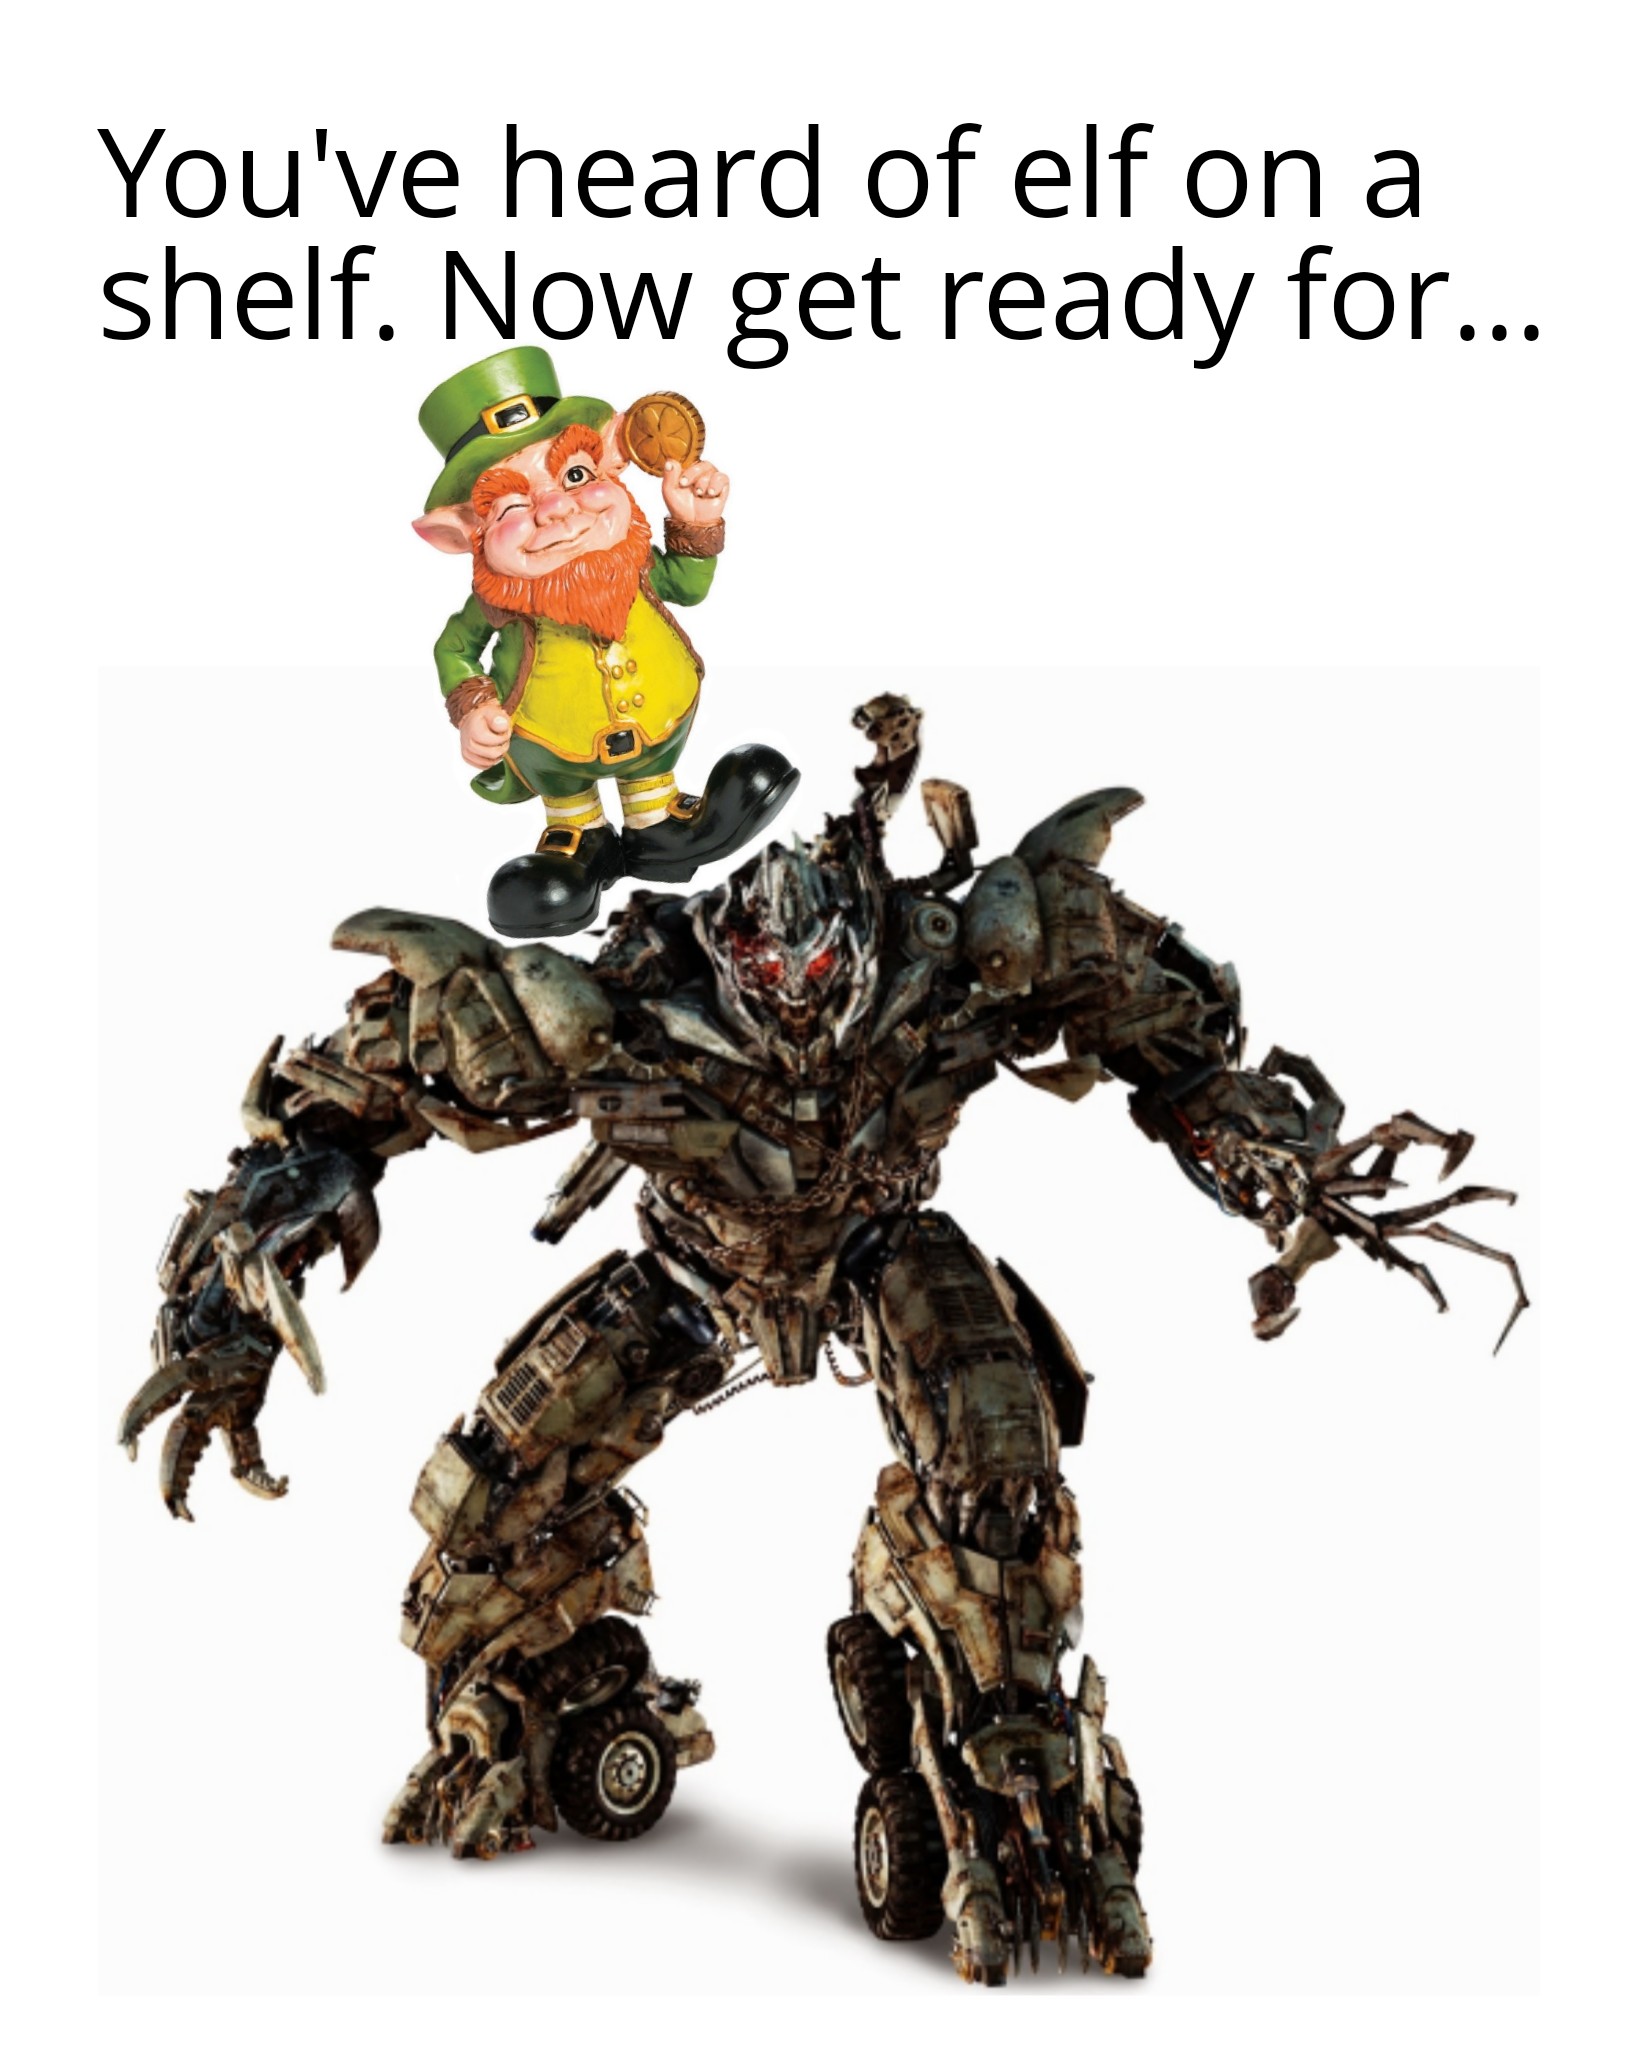 monday morning randomness - megatron transformers png - You've heard of elf on a shelf. Now get ready for... 100